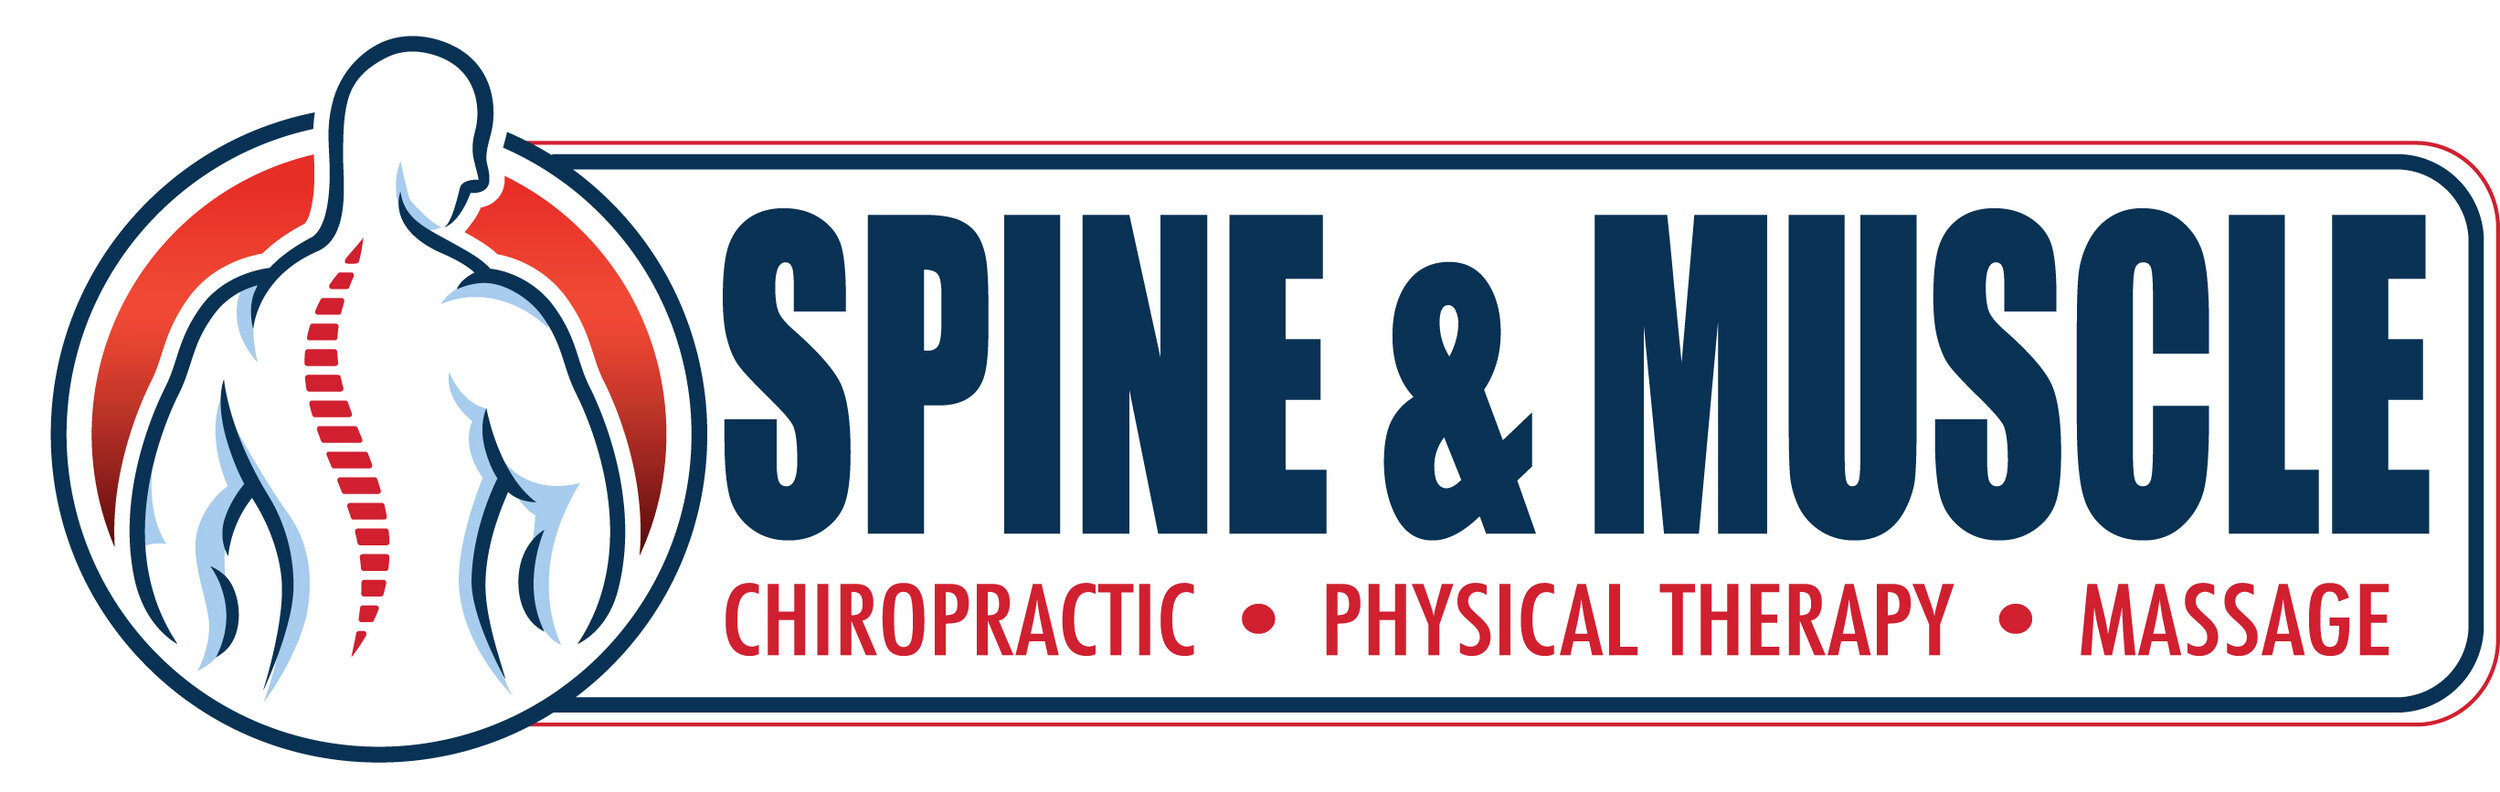 SPINE AND MUSCLE Chiropractic and Physical Therapy